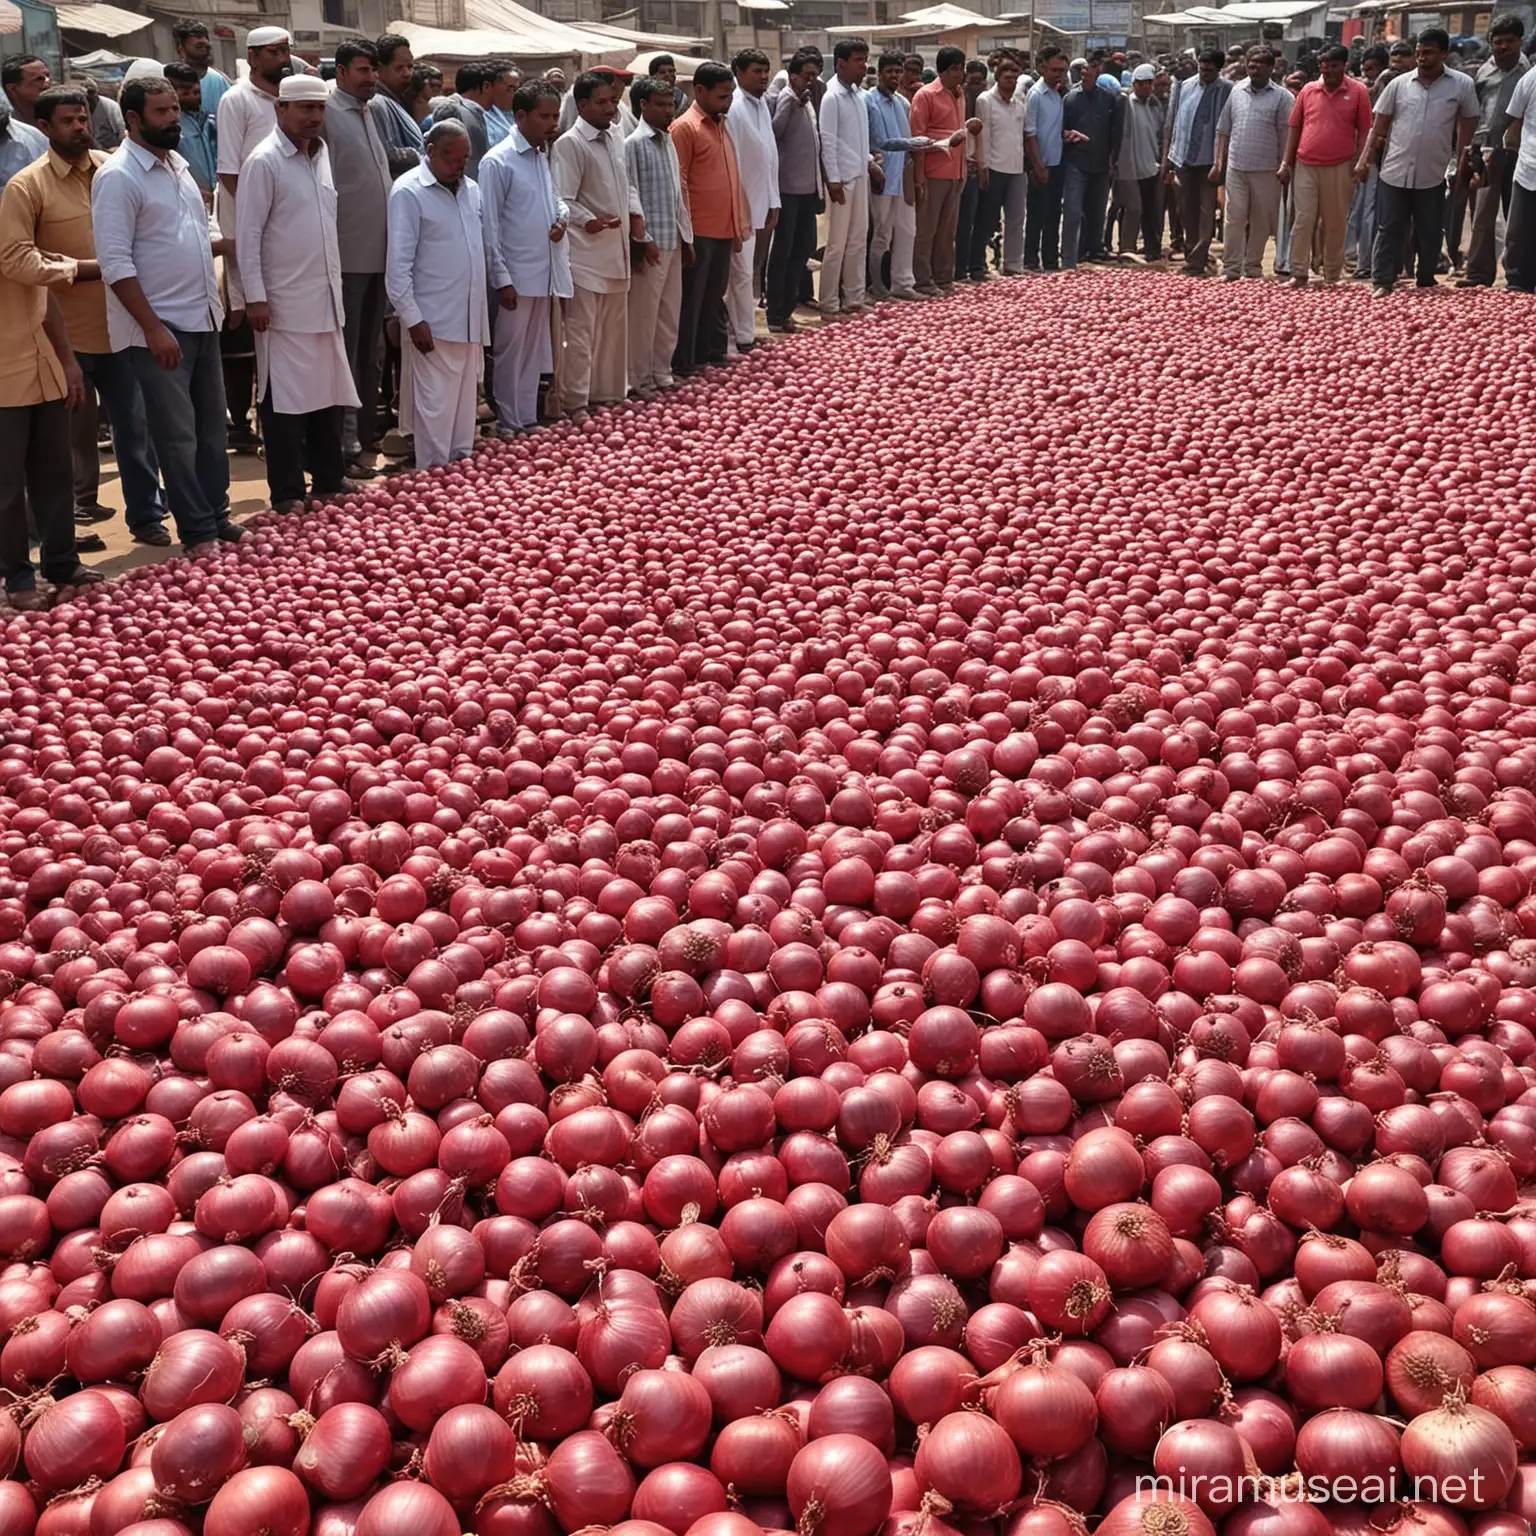 market where onions are selling in auctions mandi